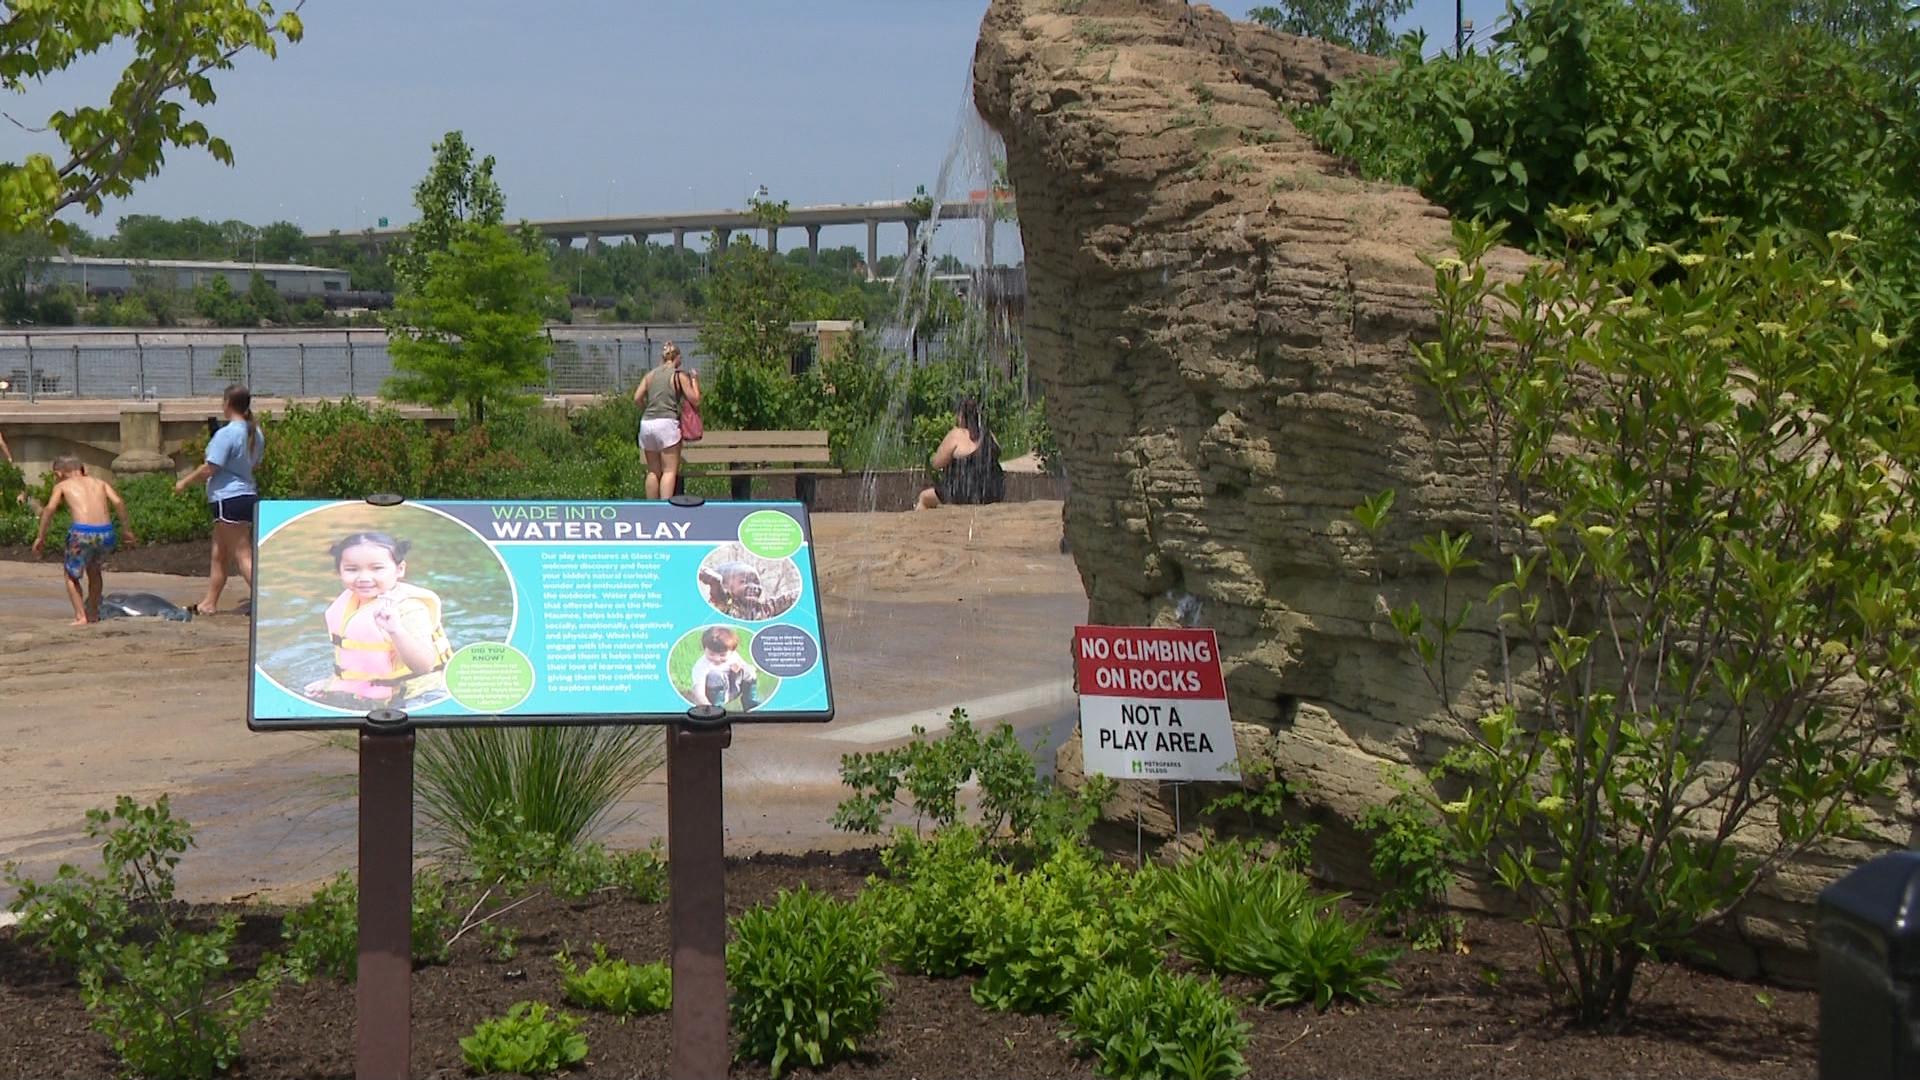 The Mini Maumee Discovery Play at the Glass City Metropark will be open daily from 10 a.m. to 8 p.m.